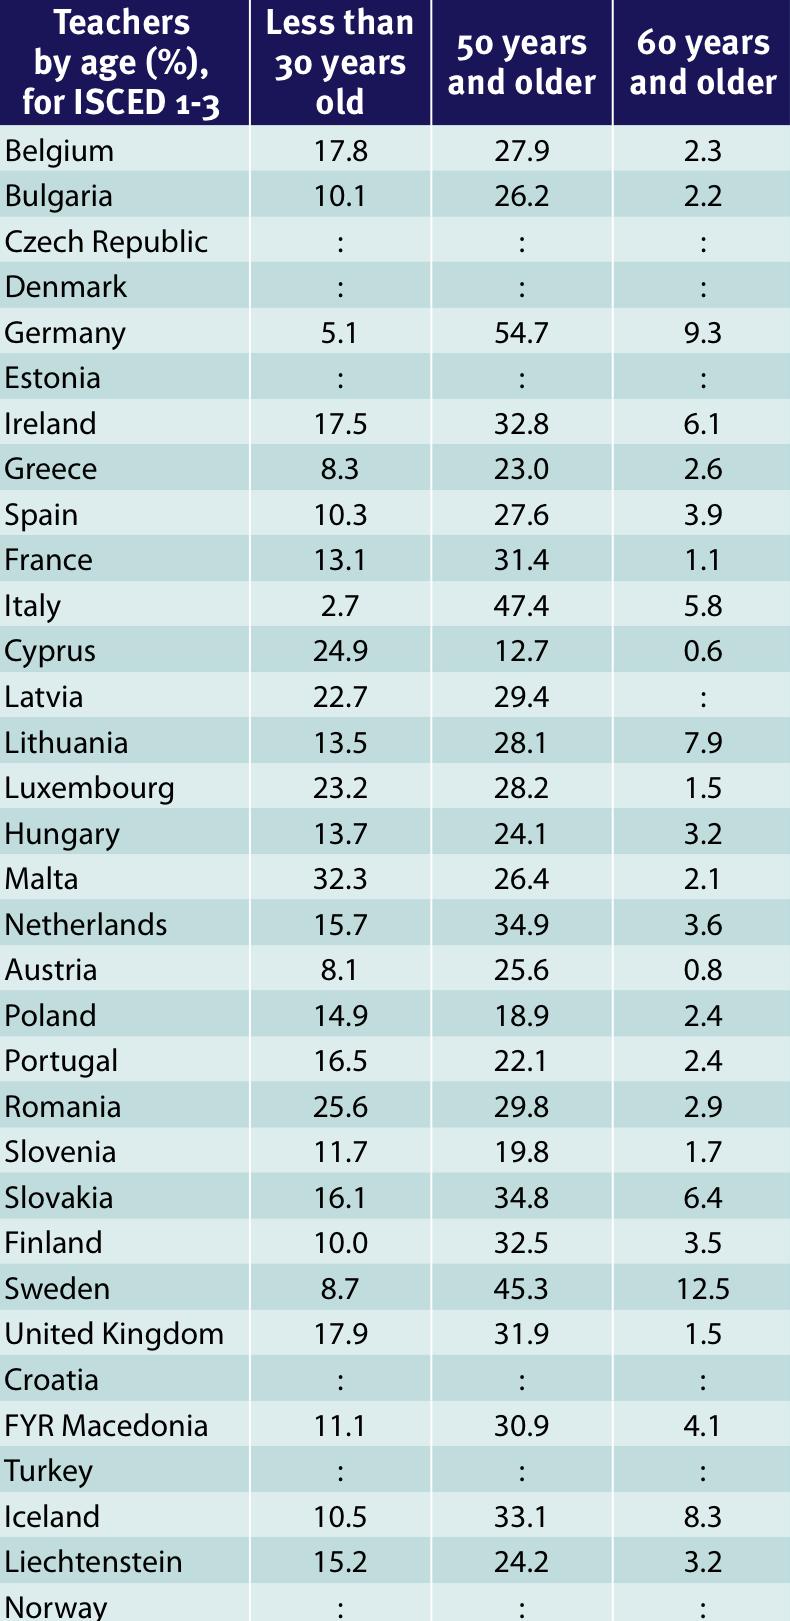 between 50 and 60 years old and the ones who are even older than 60 years, Poland has the lowest value with only 21,3 percent, followed by Lithuania with 36,0 percent.